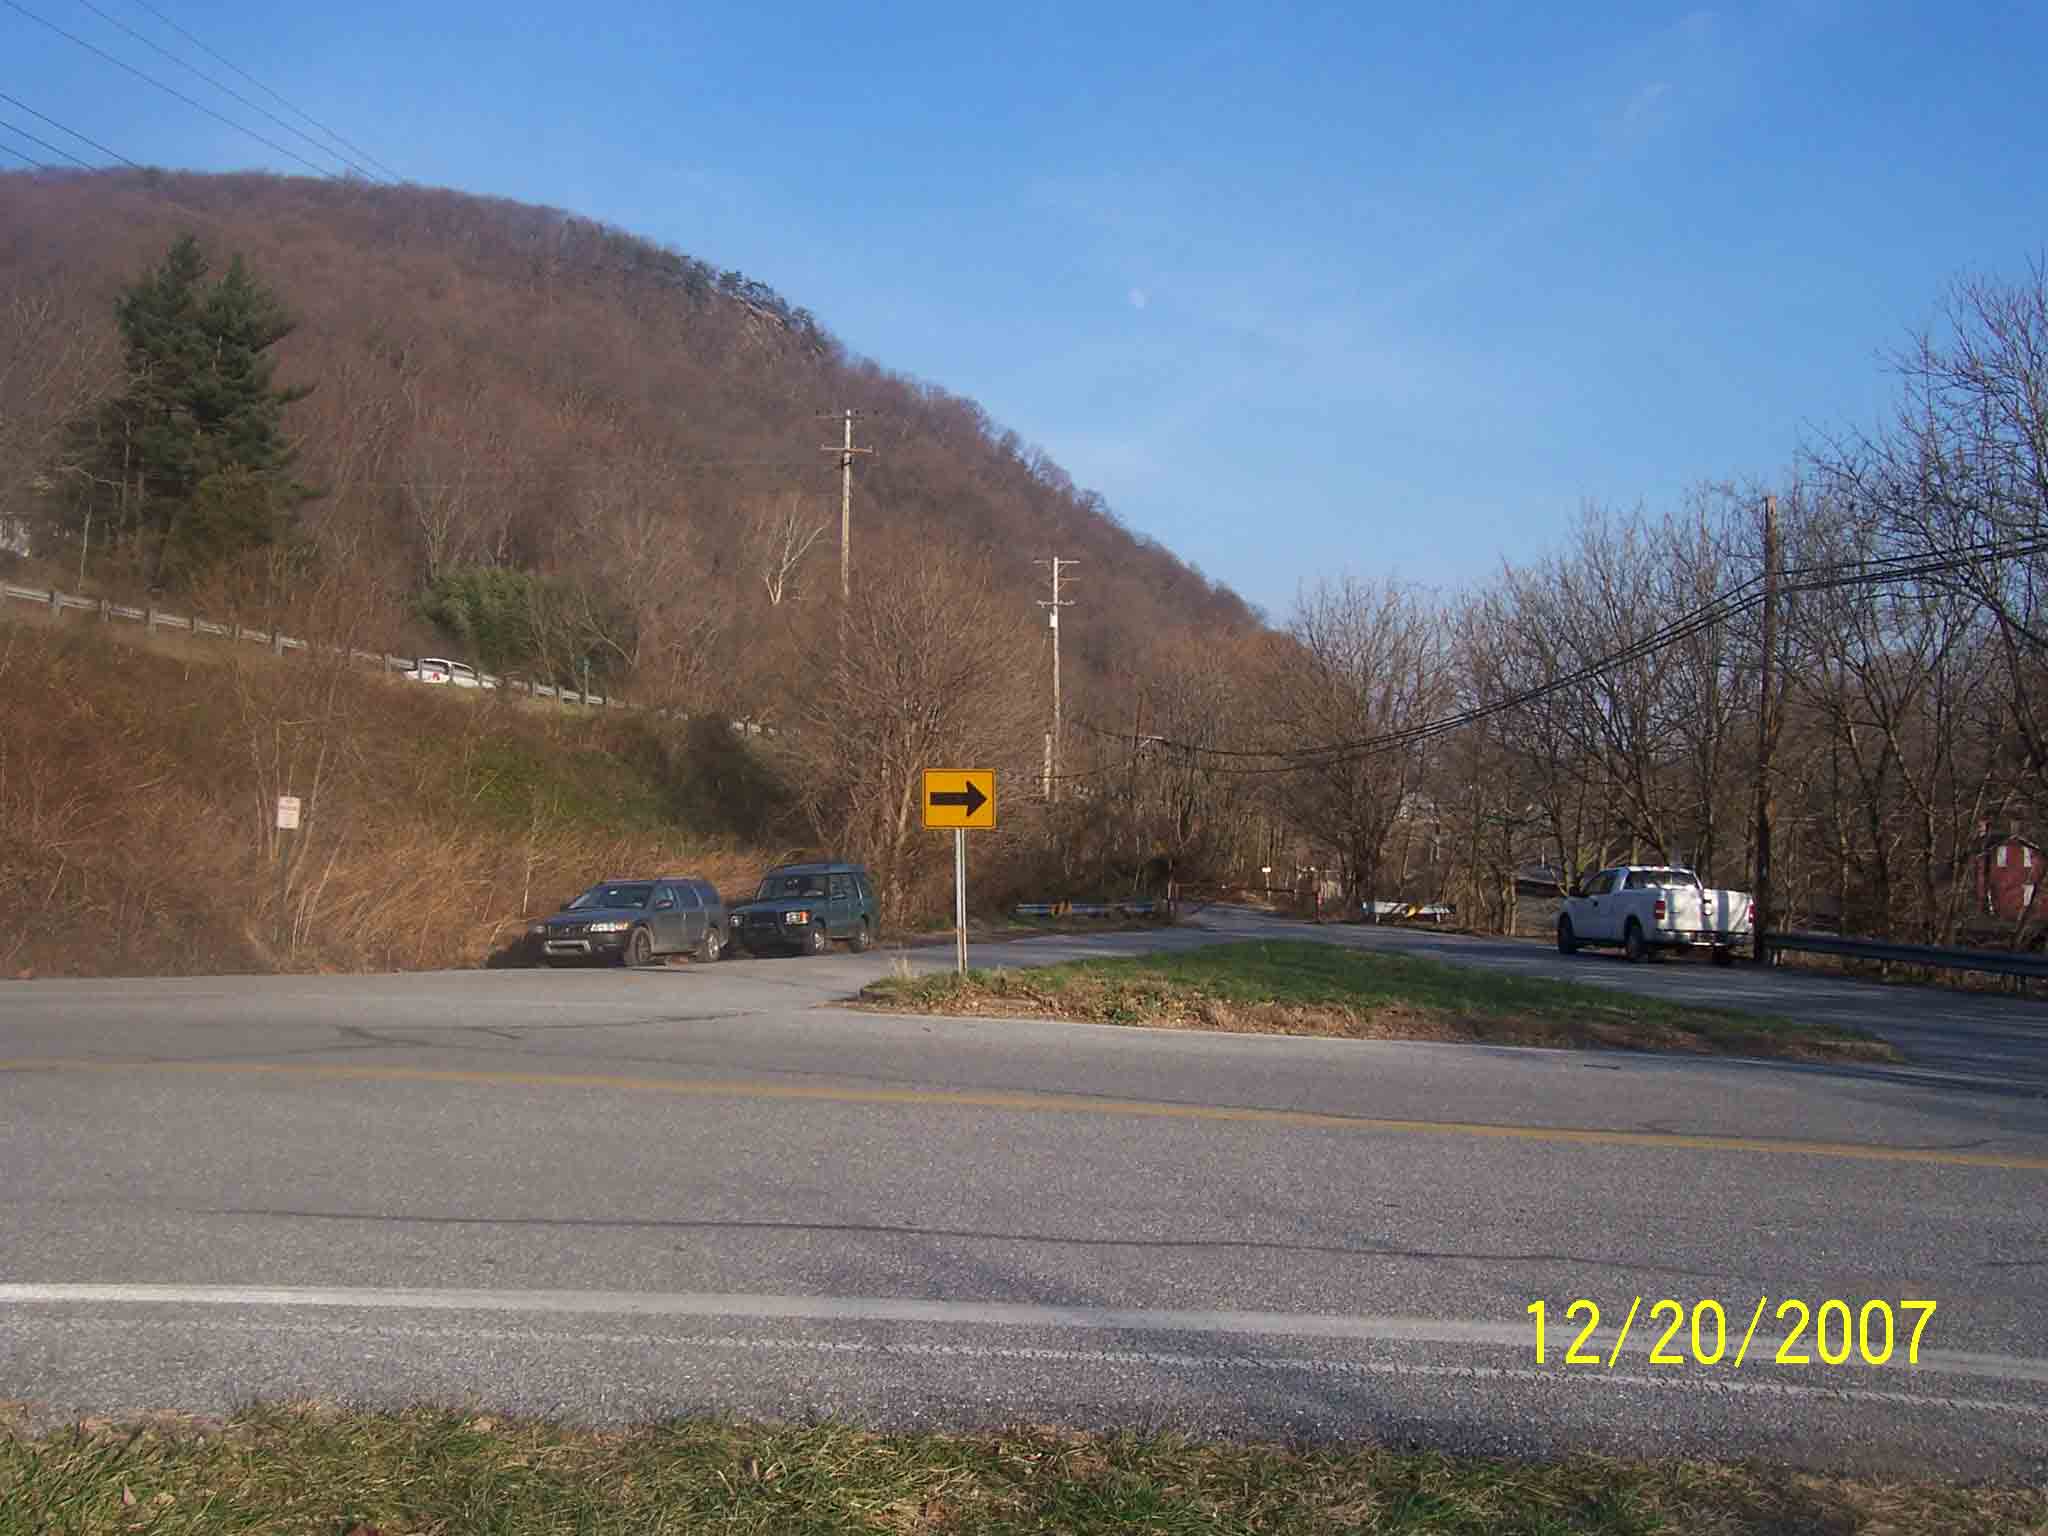 mm 0.4 - Parking at Keep Tryst just north of C&O canal entrance.  Courtesy at_md_rob@yahoo.com